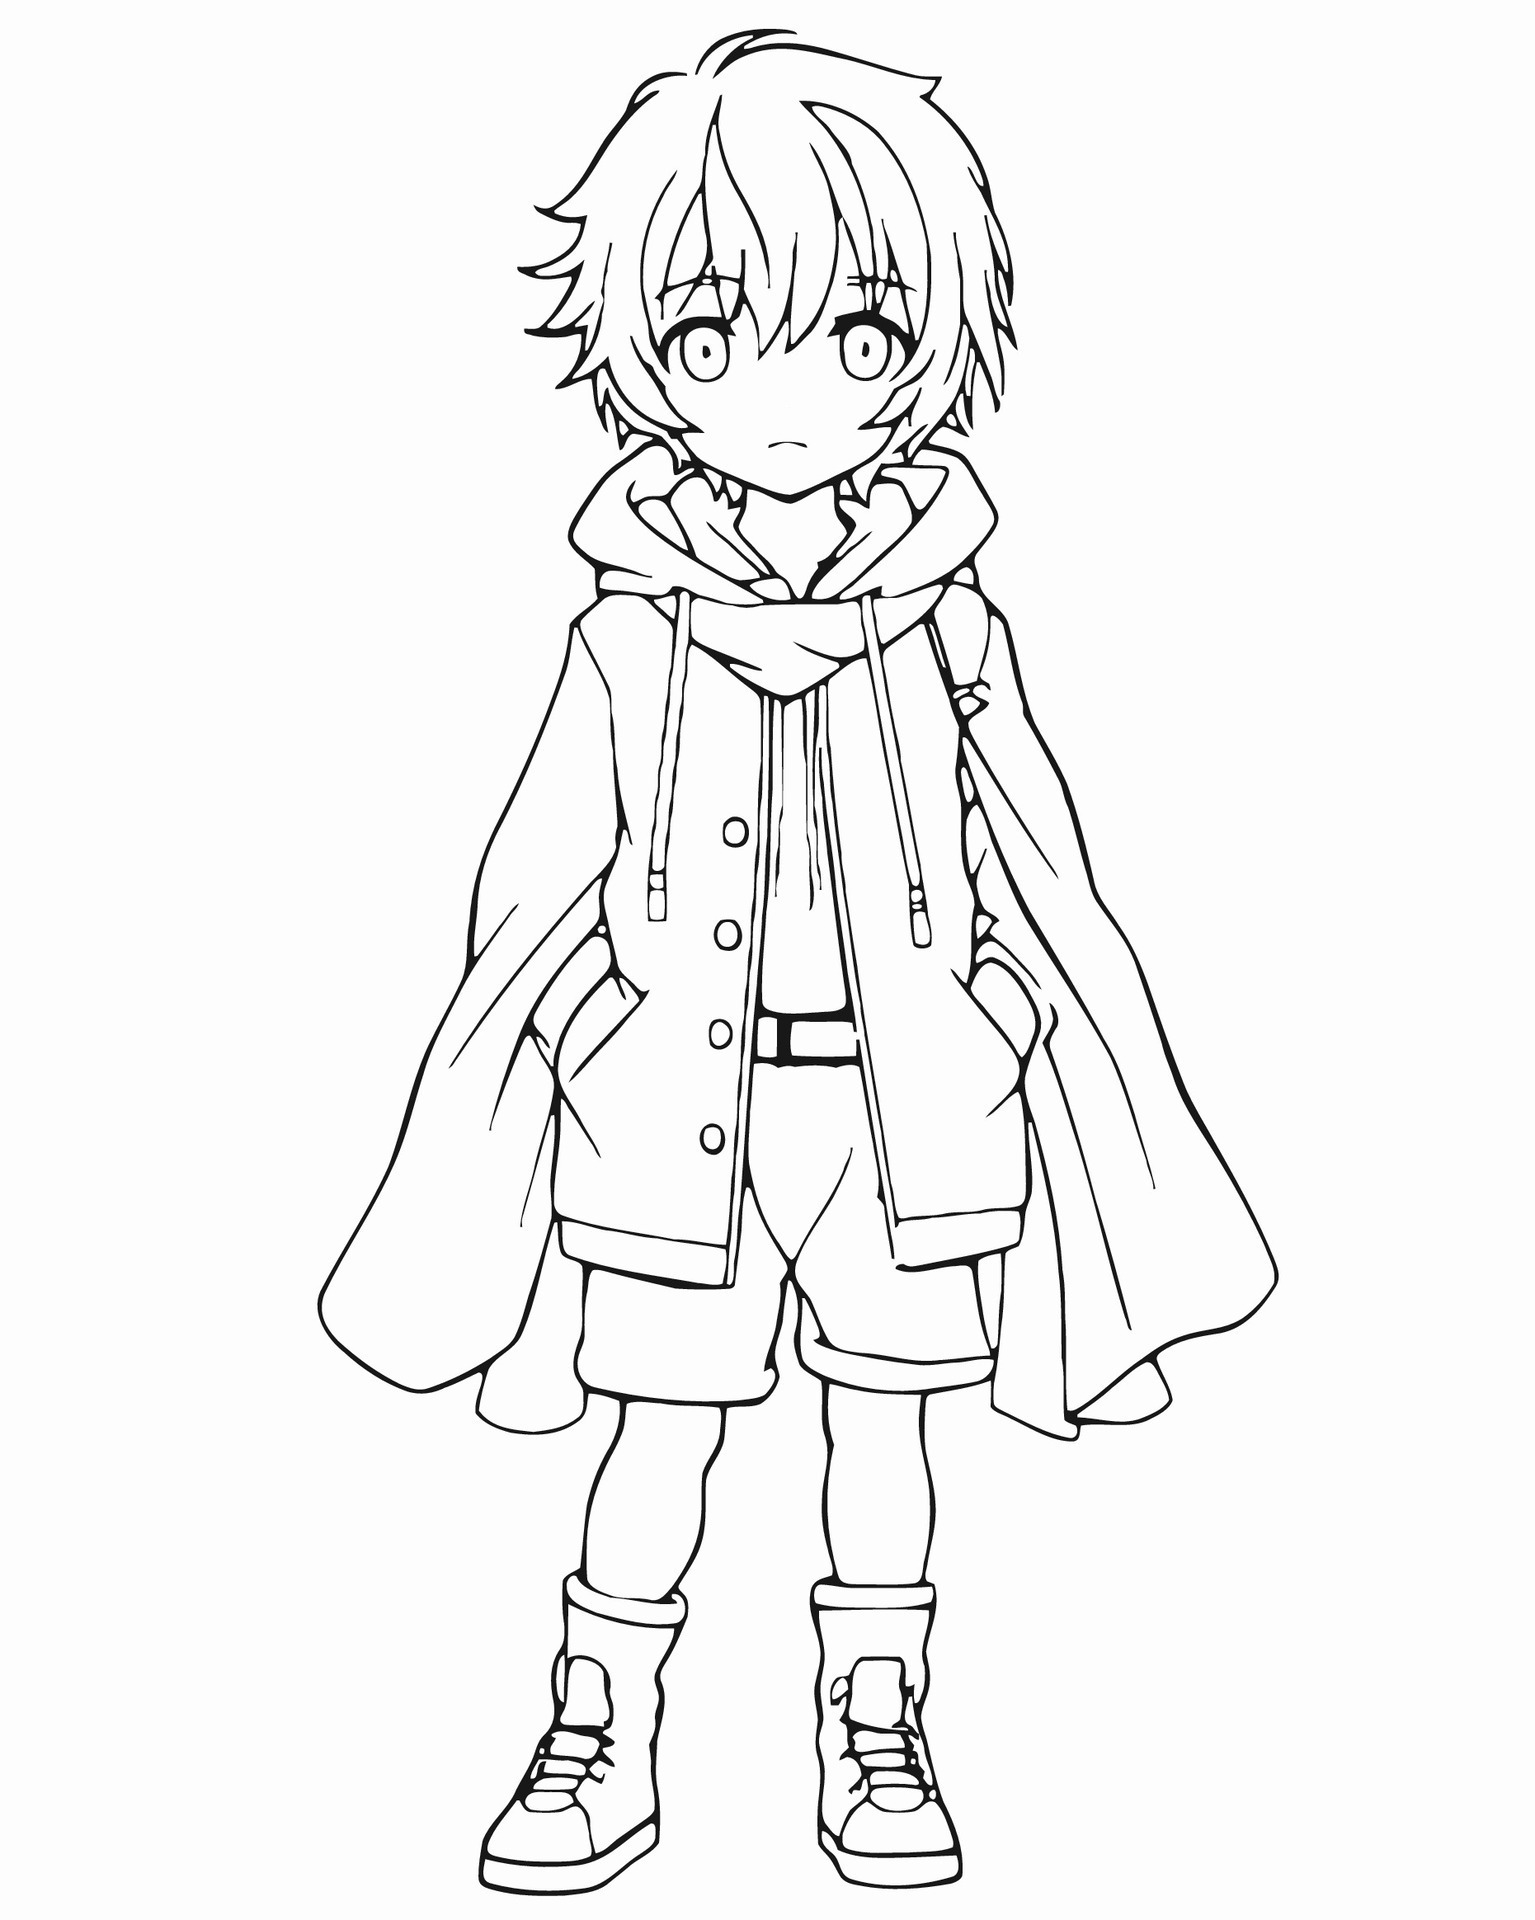 Anime Boy Coloring Pages - Free Printable Coloring Pages for Kids